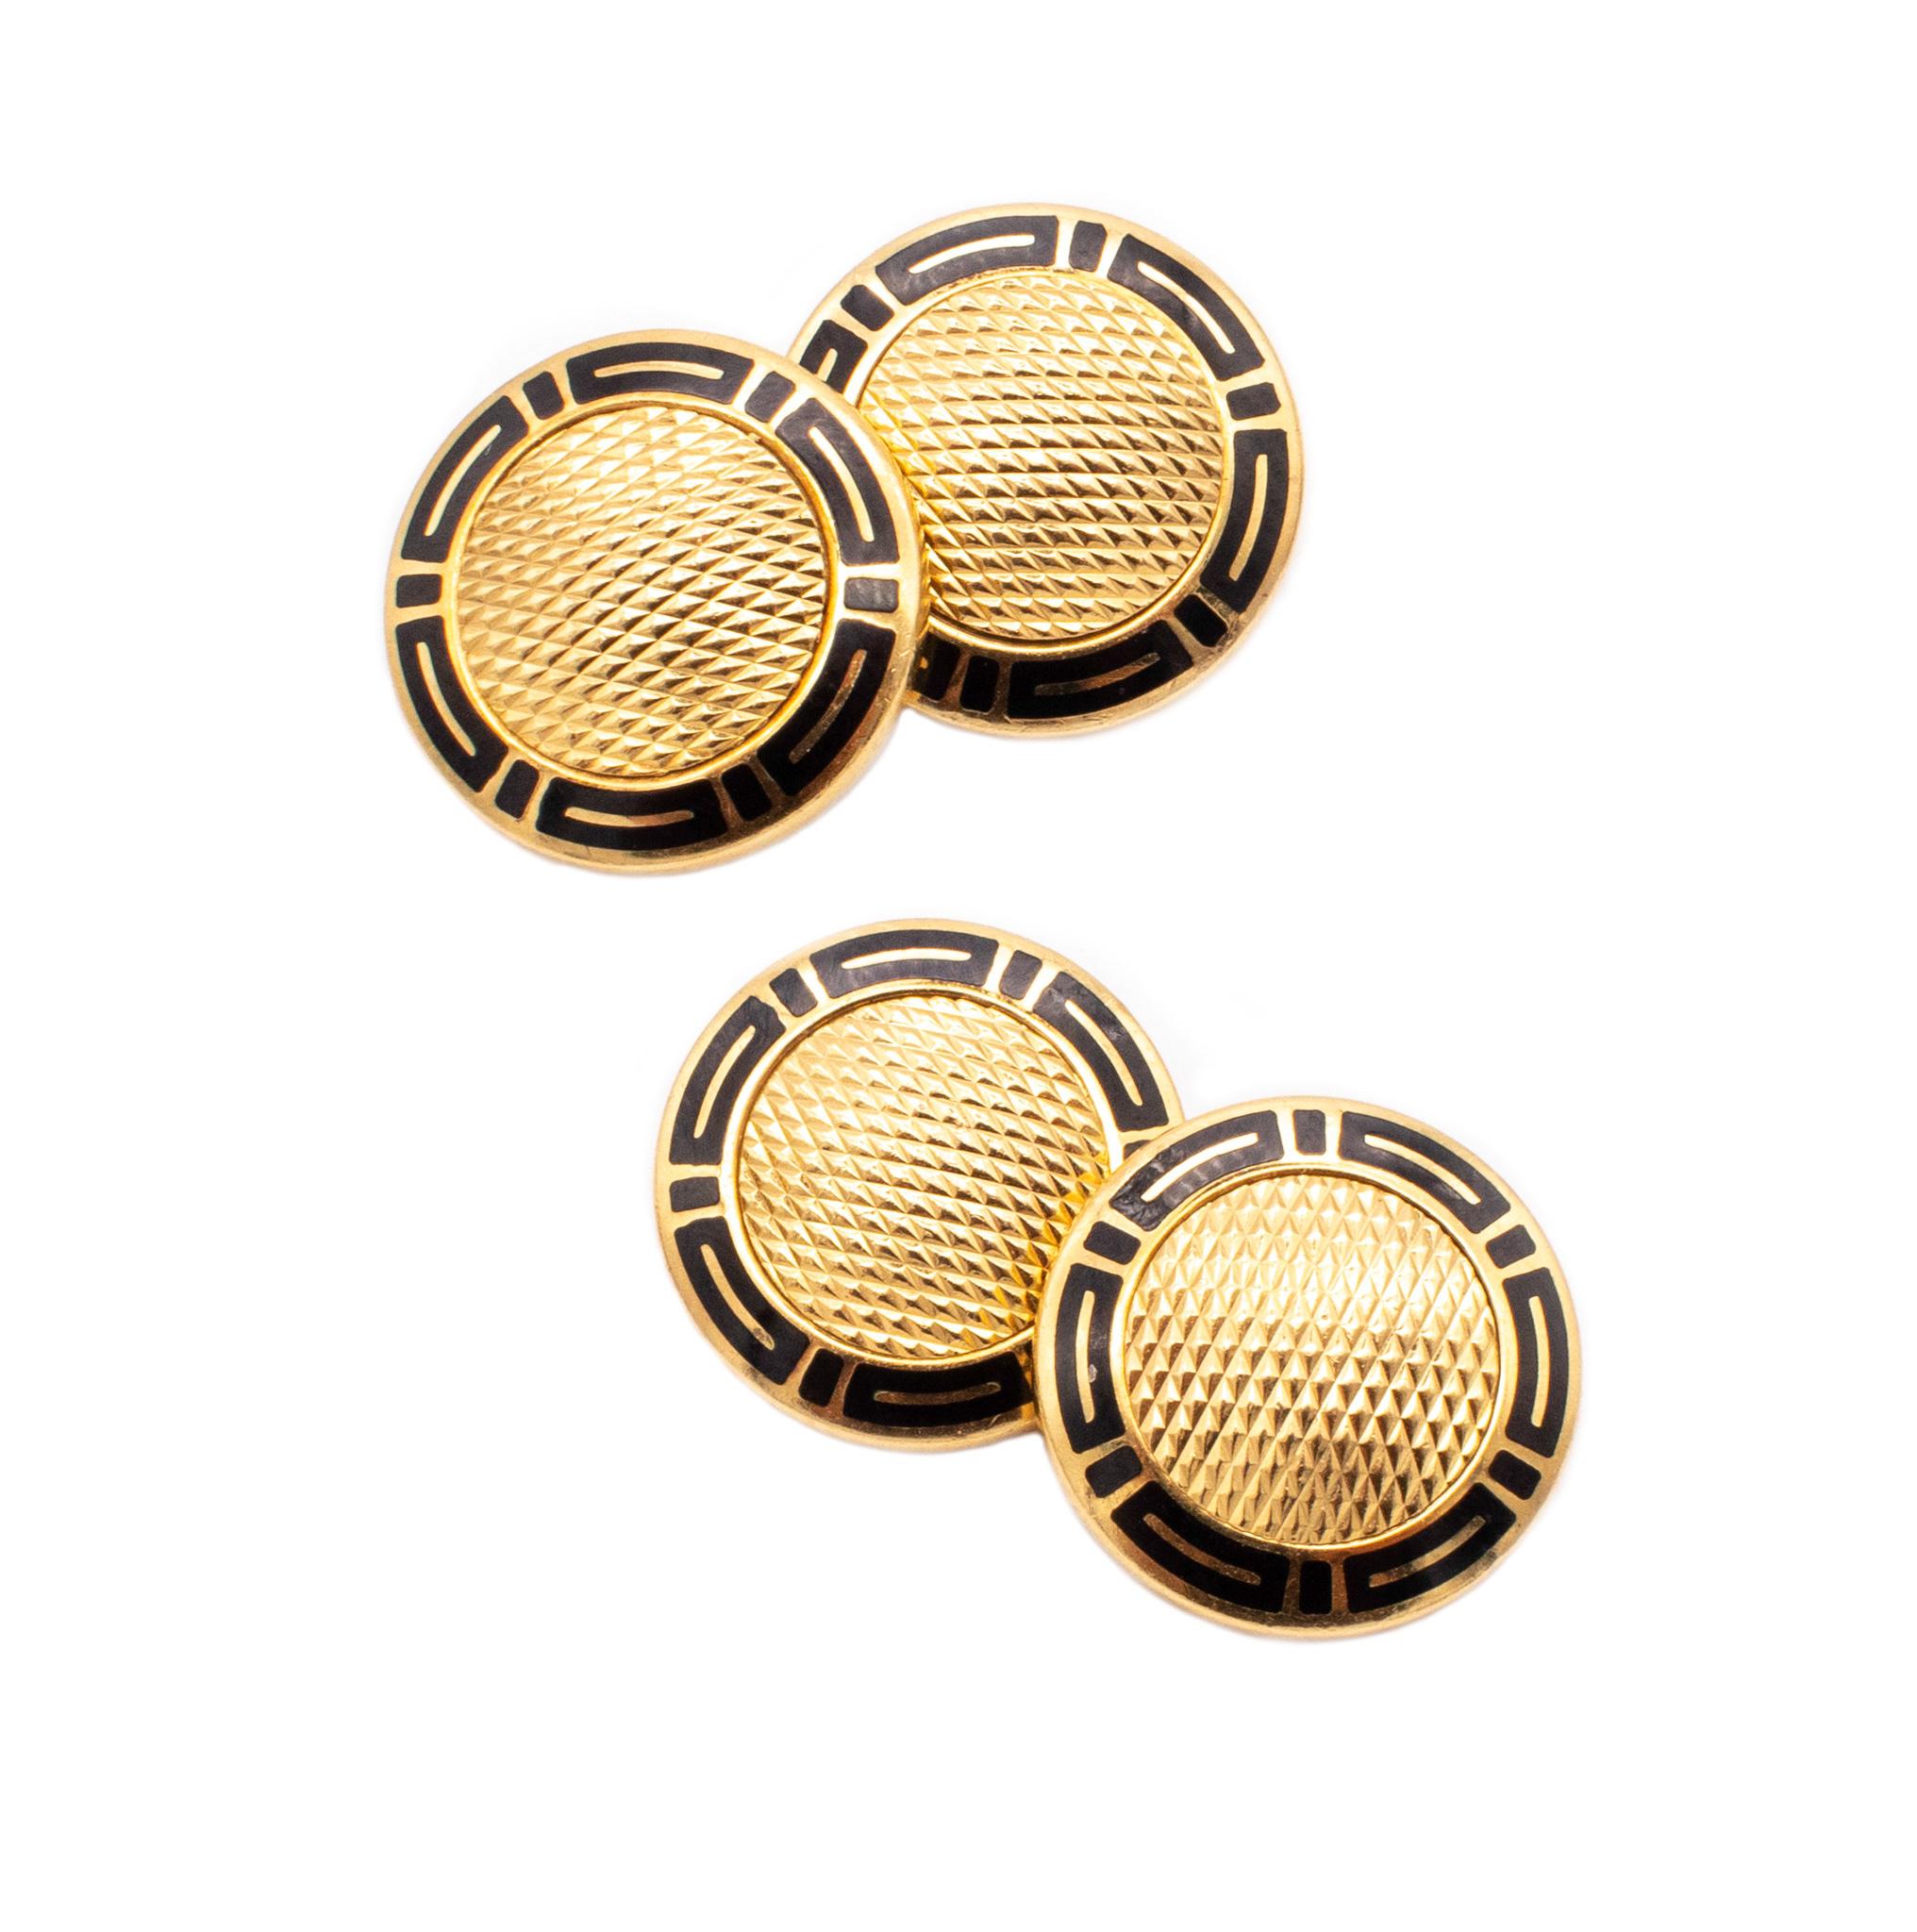 Art Deco Bvlgari Roma Art-Deco Cufflinks in 18Kt Yellow Gold with Black Enamel For Sale